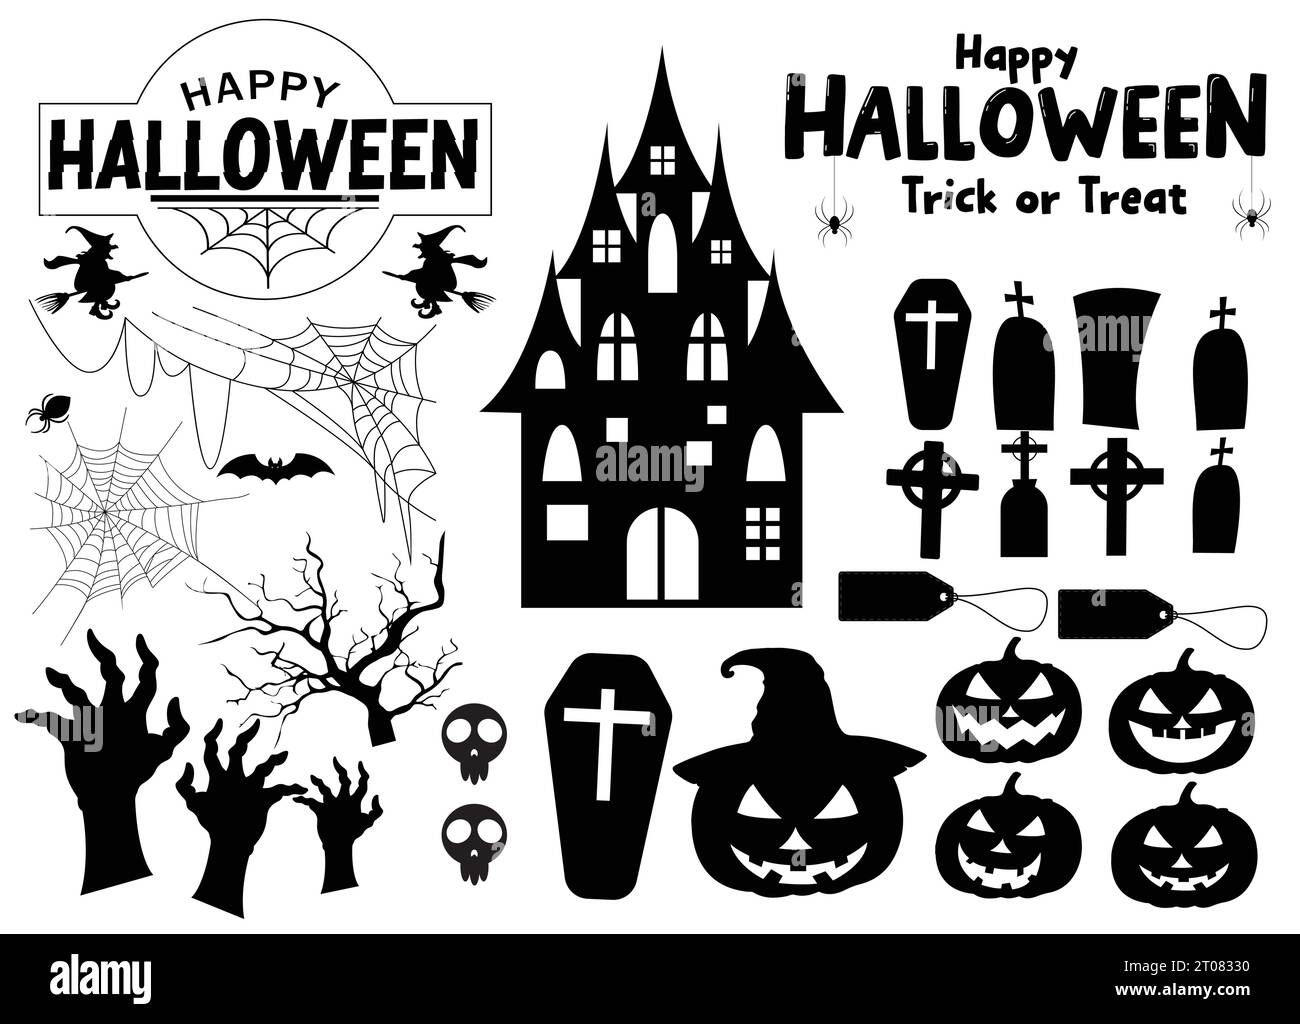 Halloween silhouette vector set design. Happy halloween text and trick or treat greeting with black shadow horror decoration elements. Vector Stock Vector